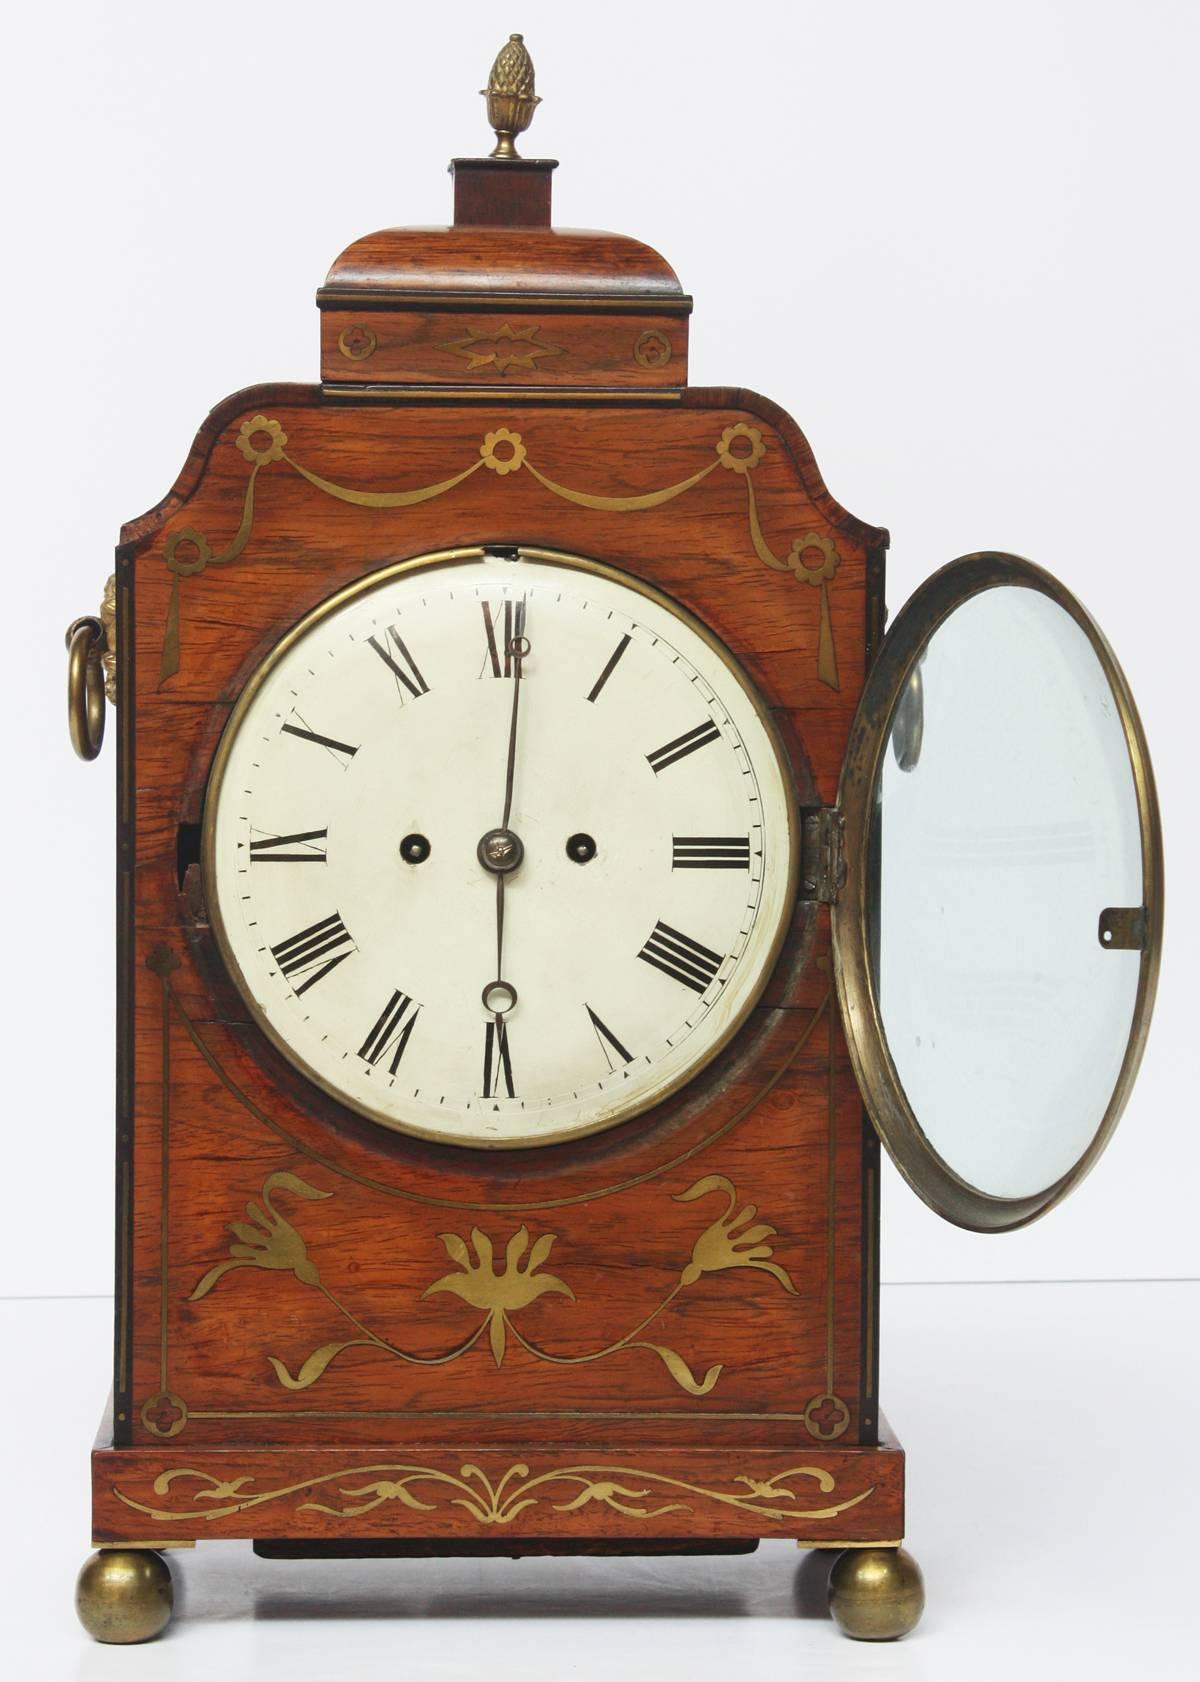 An English Regency bracket clock of rosewood with brass inlay, with a white dial. Movement is a twin fusee striking on a cast bell. The pendulum appears to be original to the movement with regulation adjustment to the top.